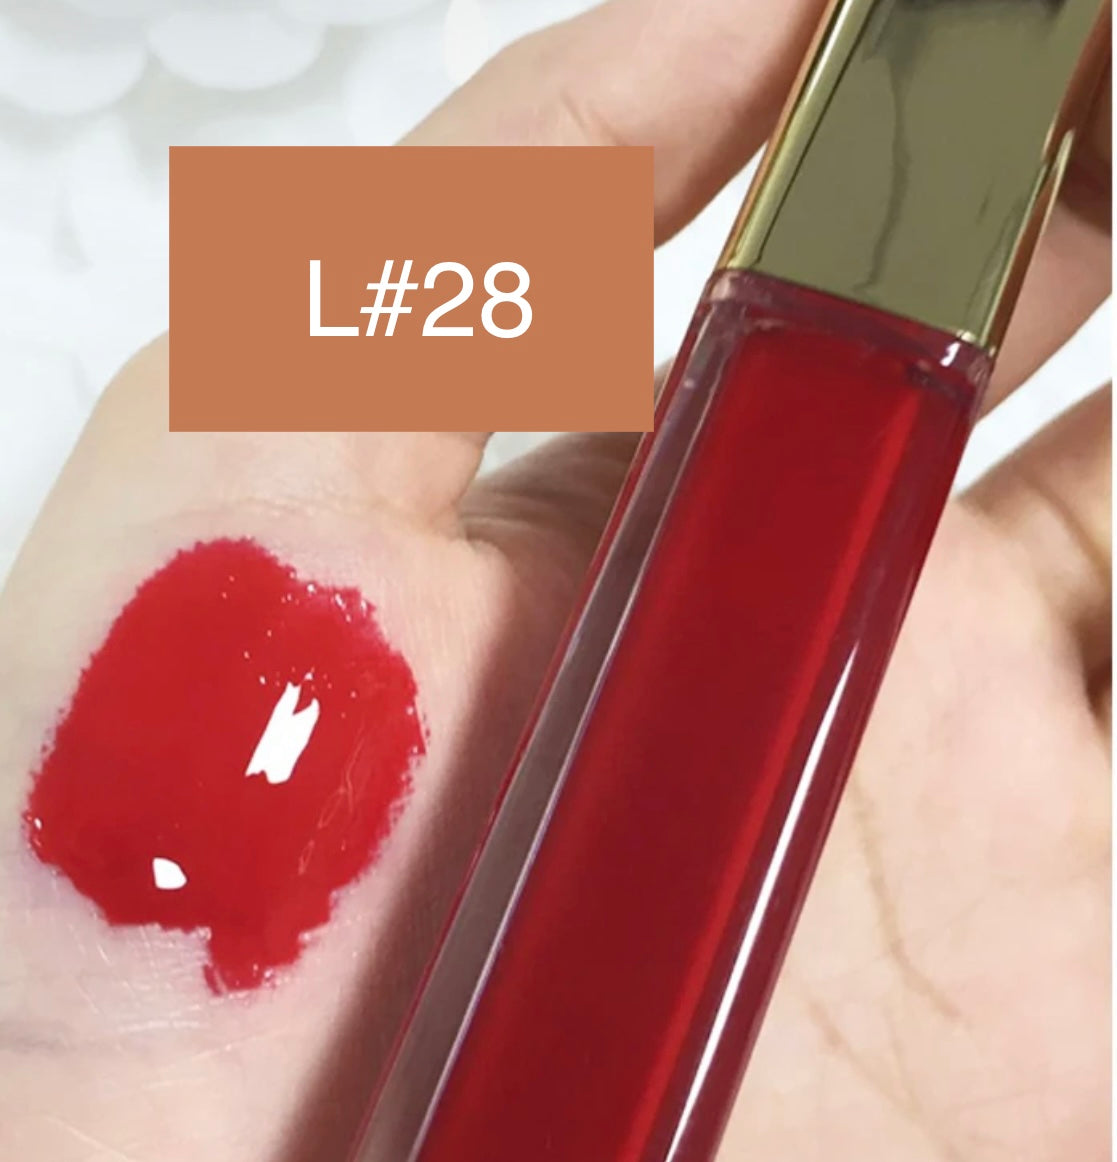 High-Shine Vegan Lip Gloss in variant of L28, providing a vibrant L28 with a glossy shine